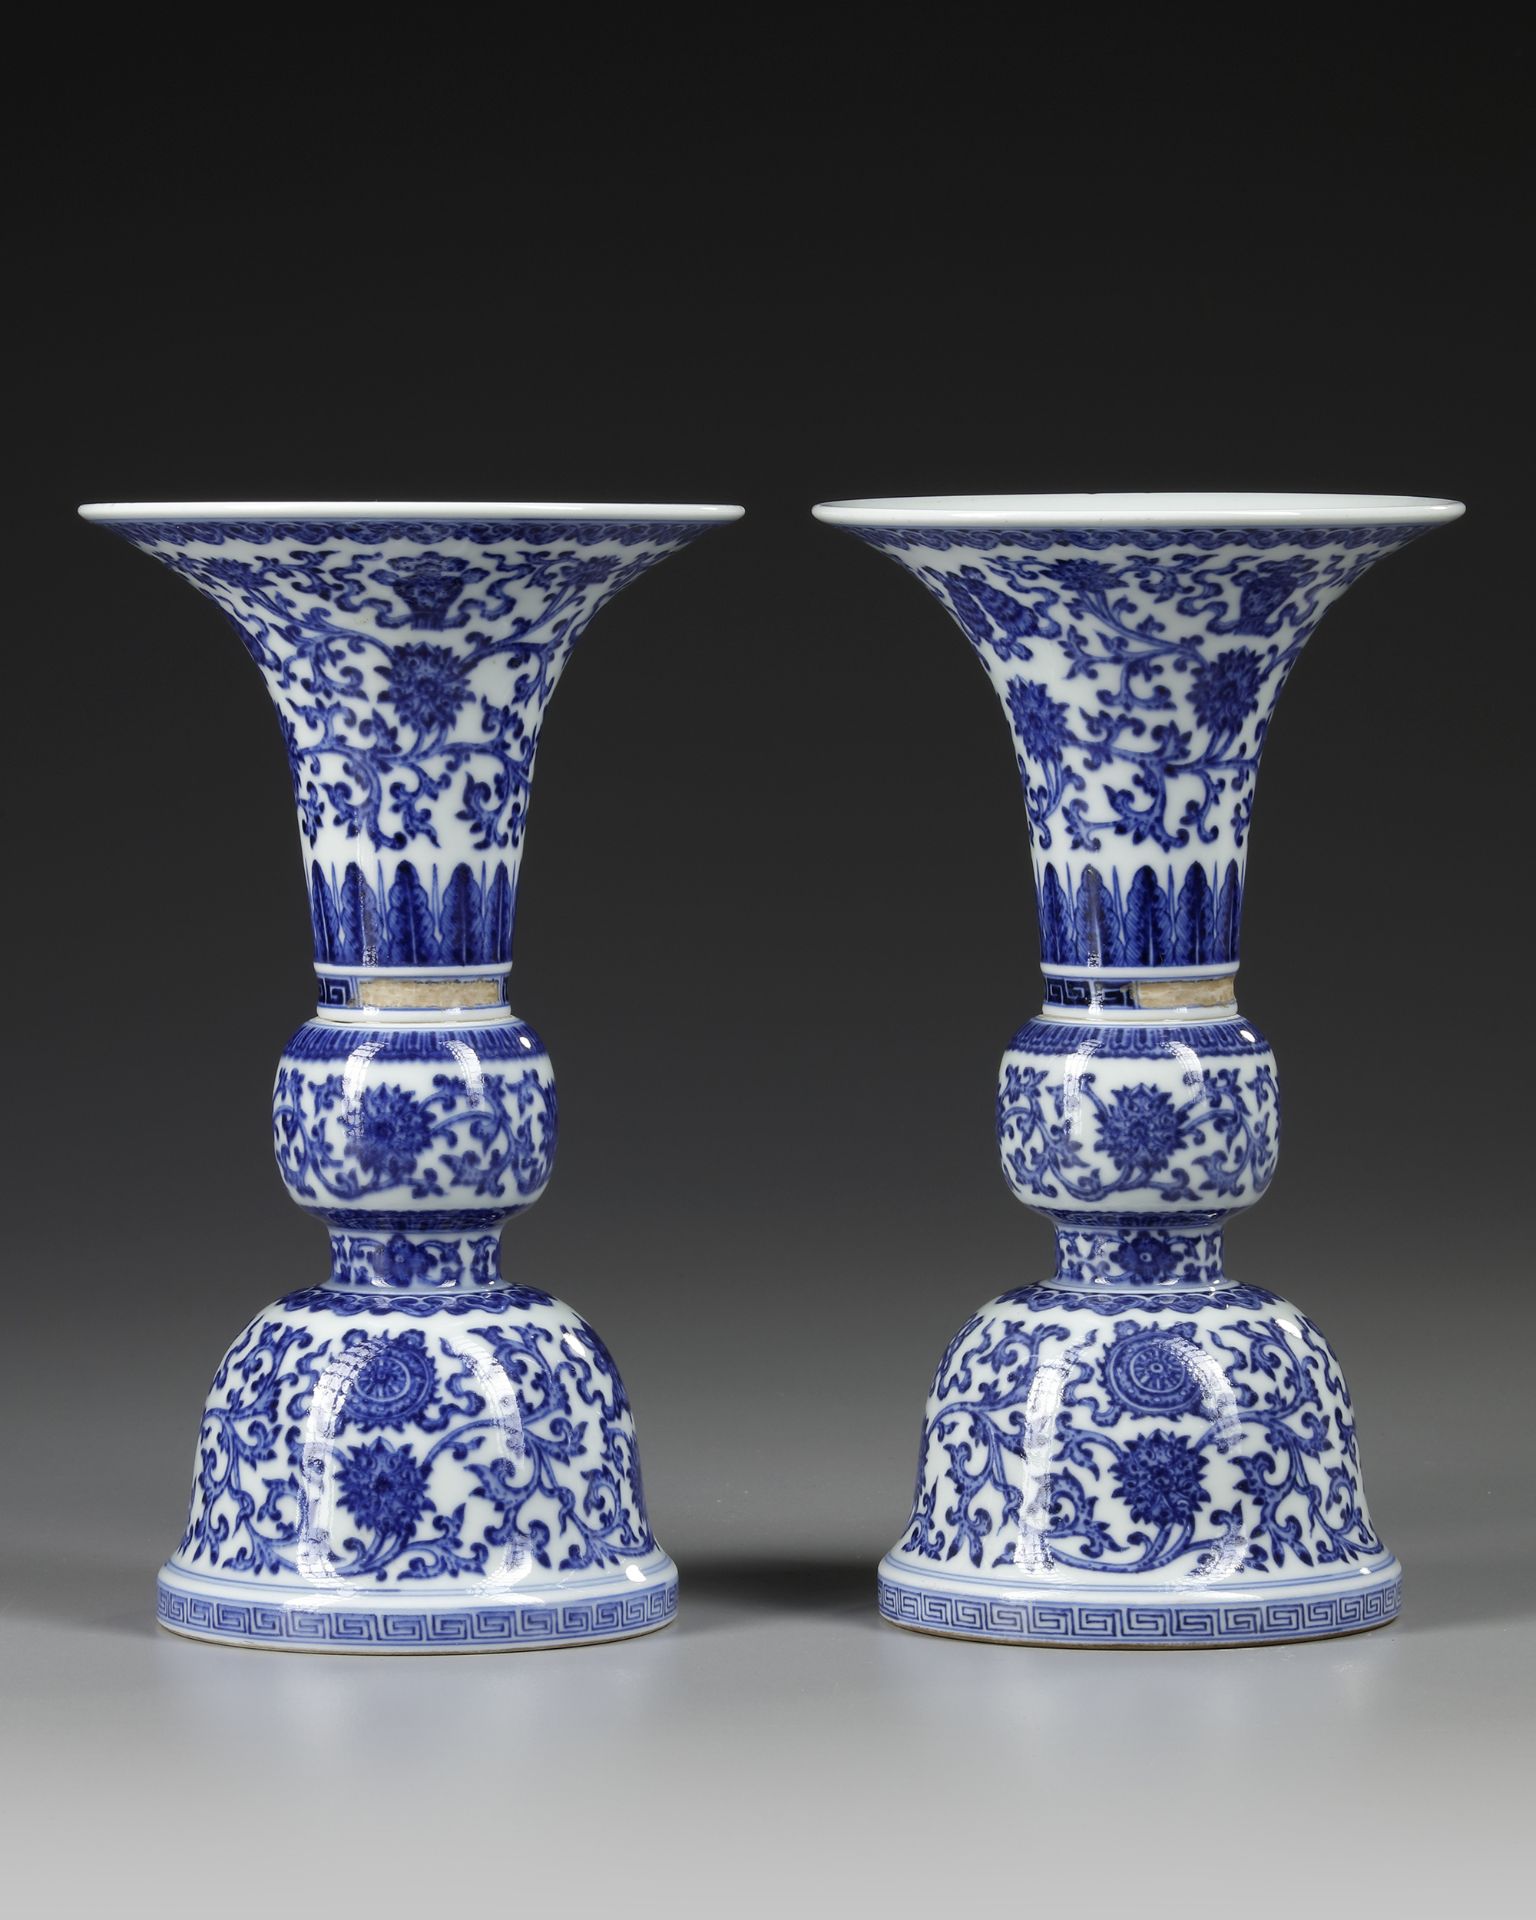 A PAIR OF CHINESE BLUE AND WHITE GU-FORM ALTAR VASES, QING DYNASTY (1644–1911)